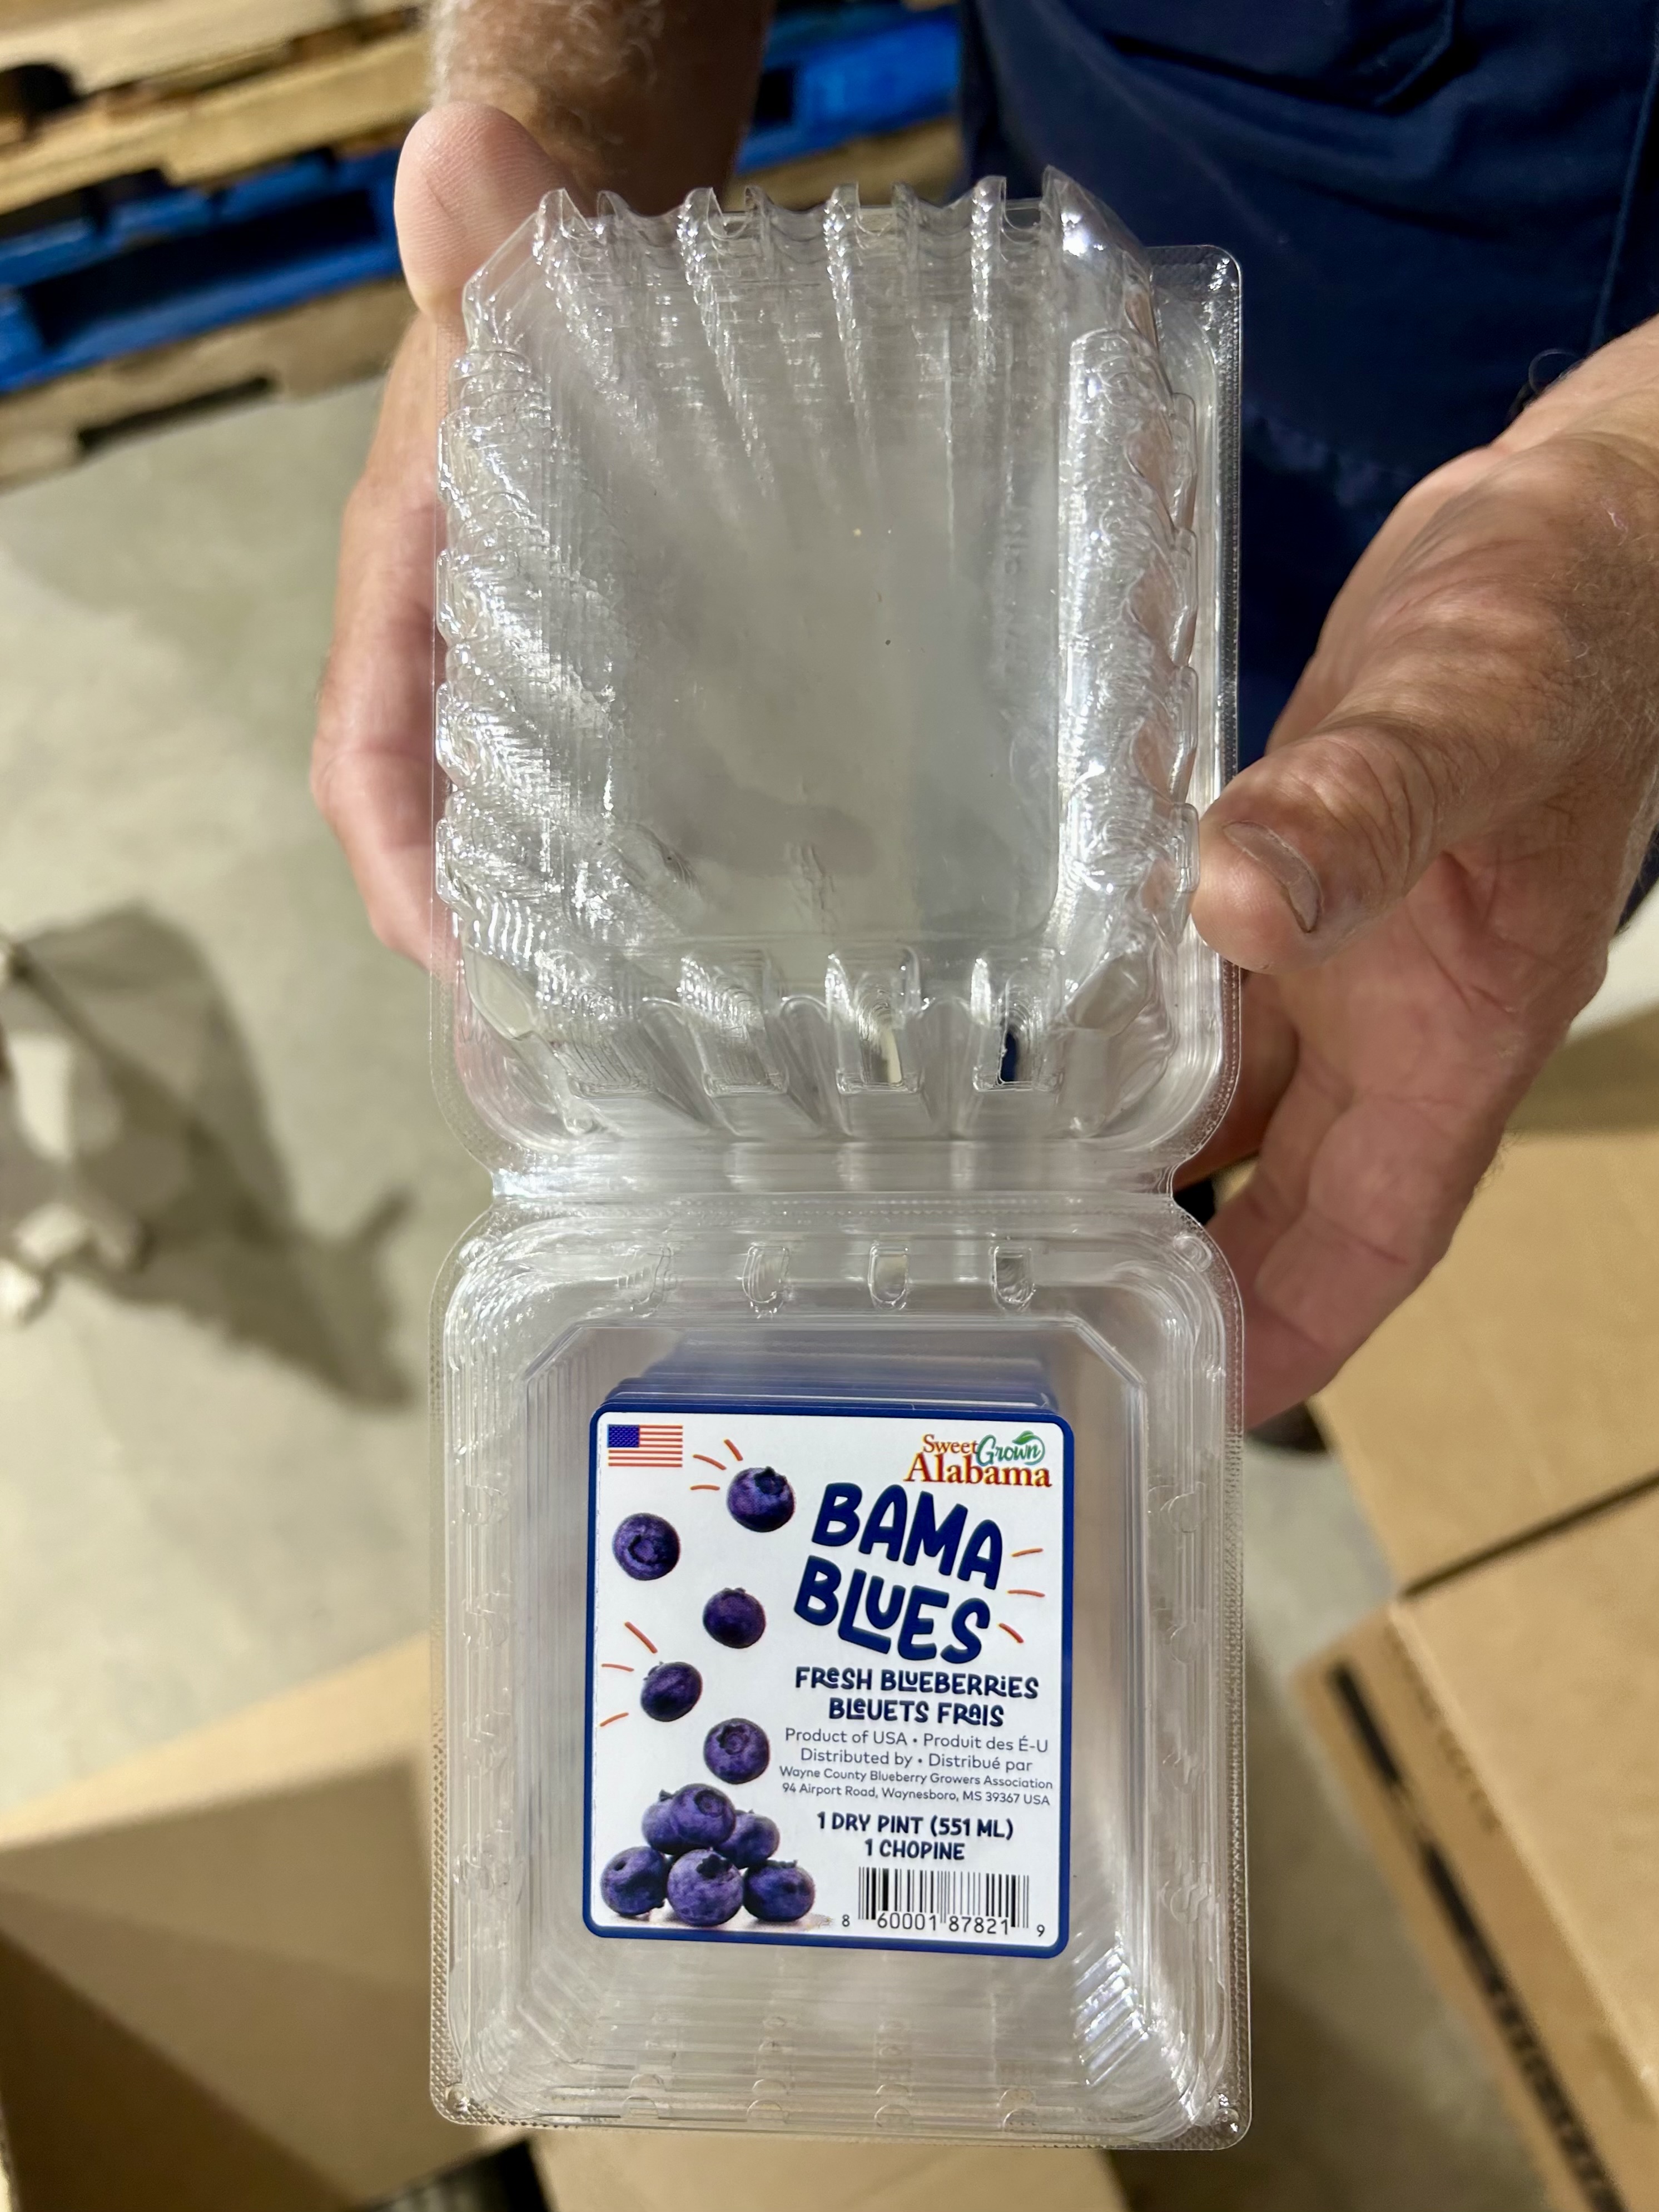 The “Bama Blues” packaging for berries grown at Ferguson Farms was designed by Katie Ferguson.